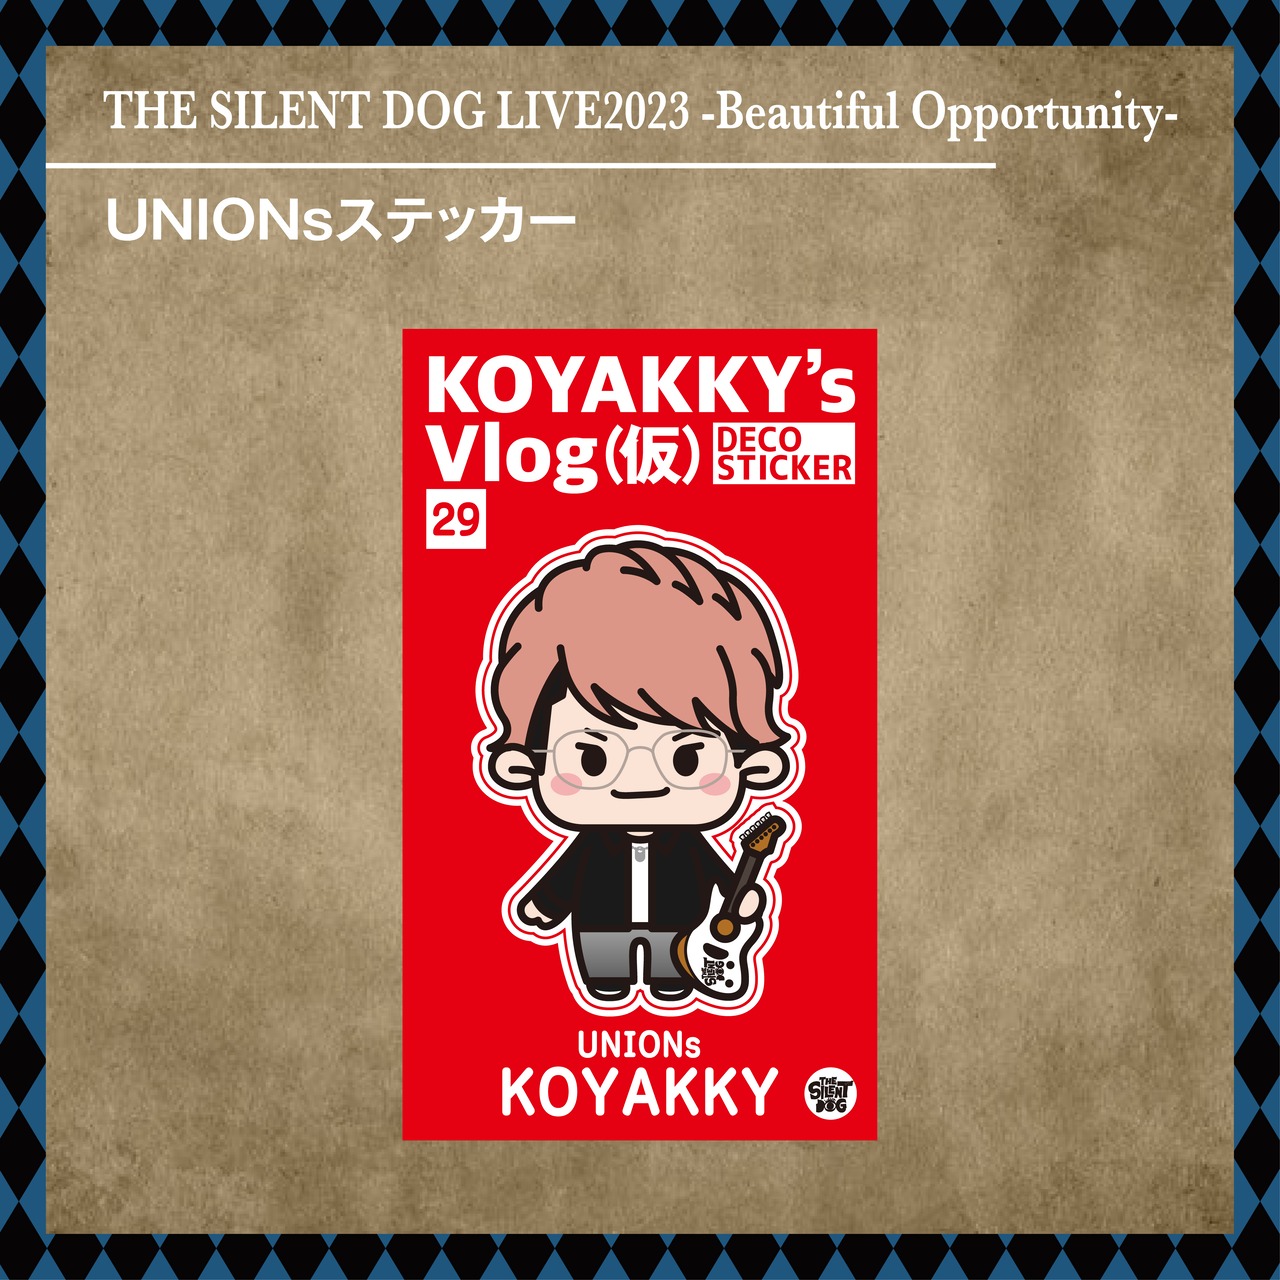 UNIONsステッカーTHE SILENT DOG LIVE2023-Beautiful Opportunity-（全３種）